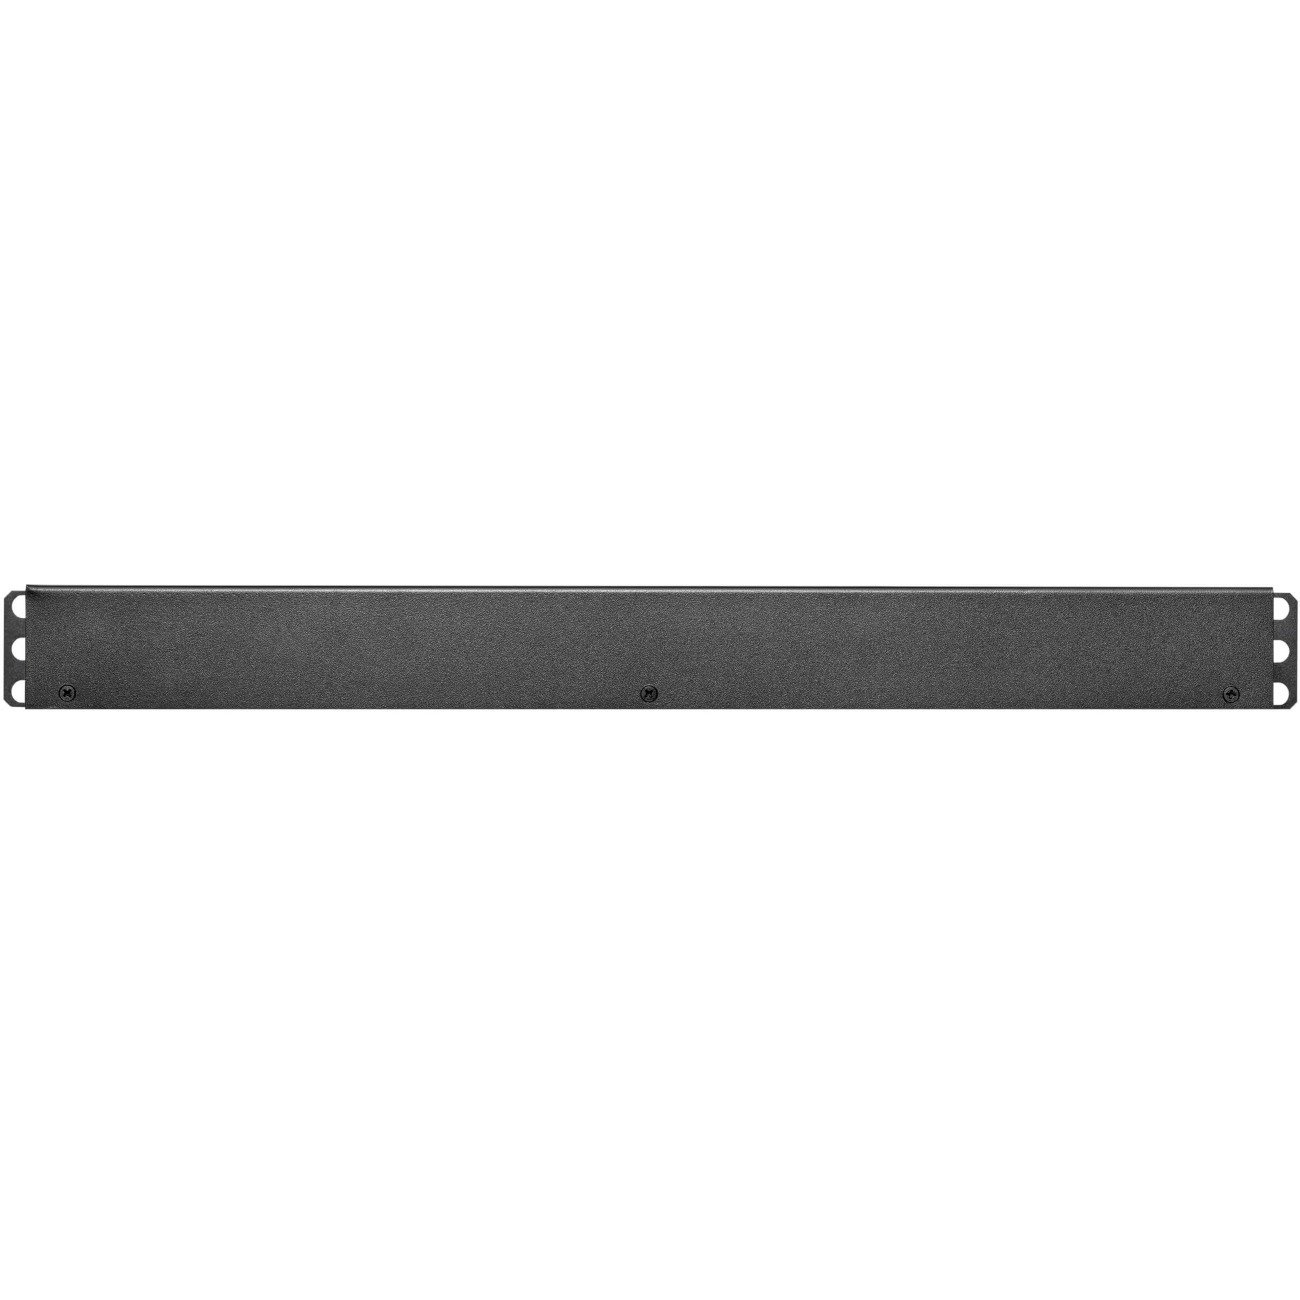 Tripp Lite by Eaton 200-250V 10A Single-Phase Hot-Swap PDU with Manual Bypass - 6 C13 Outlets, 2 C14 Inlets, 1U Rack/Wall